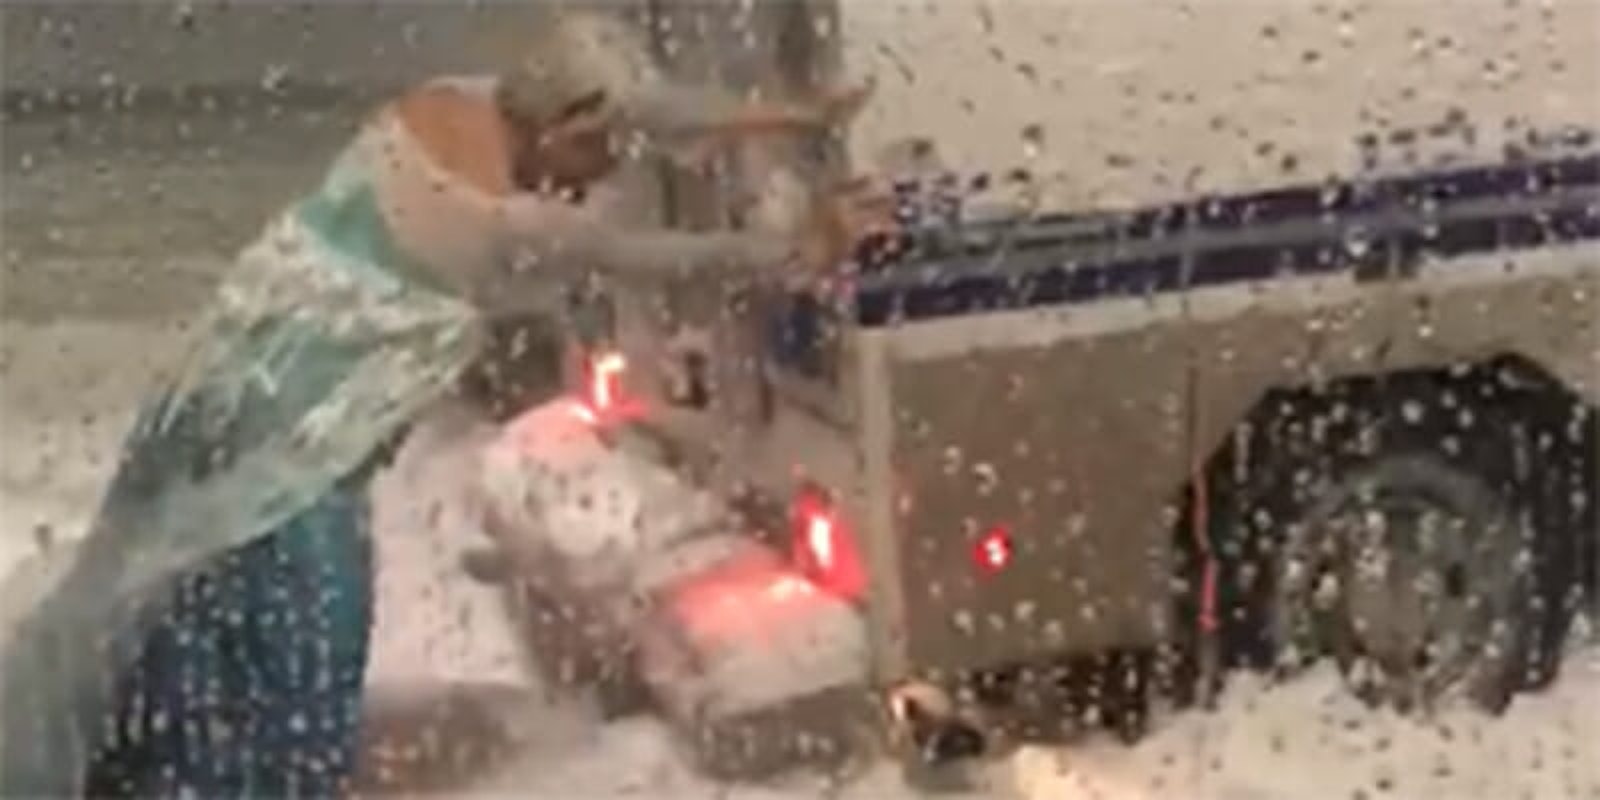 A drag queen dressed as Elsa saved a police van from snow in Boston.